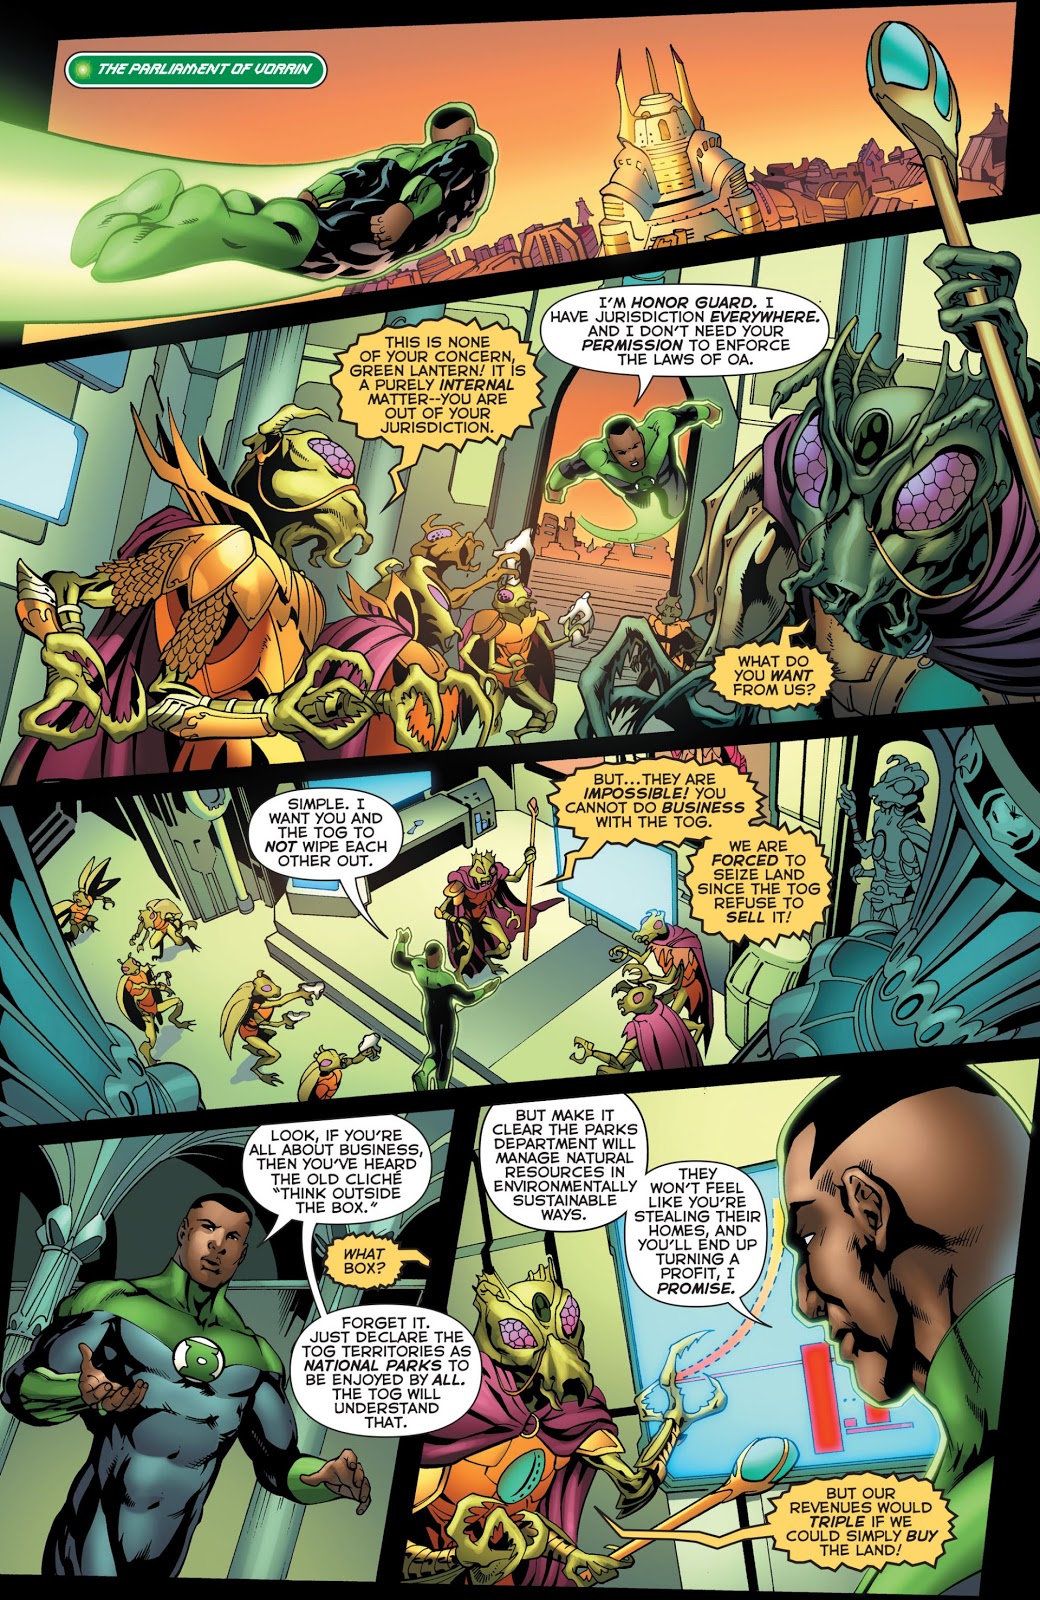 From - Green Lantern Corps Vol. 2 #60